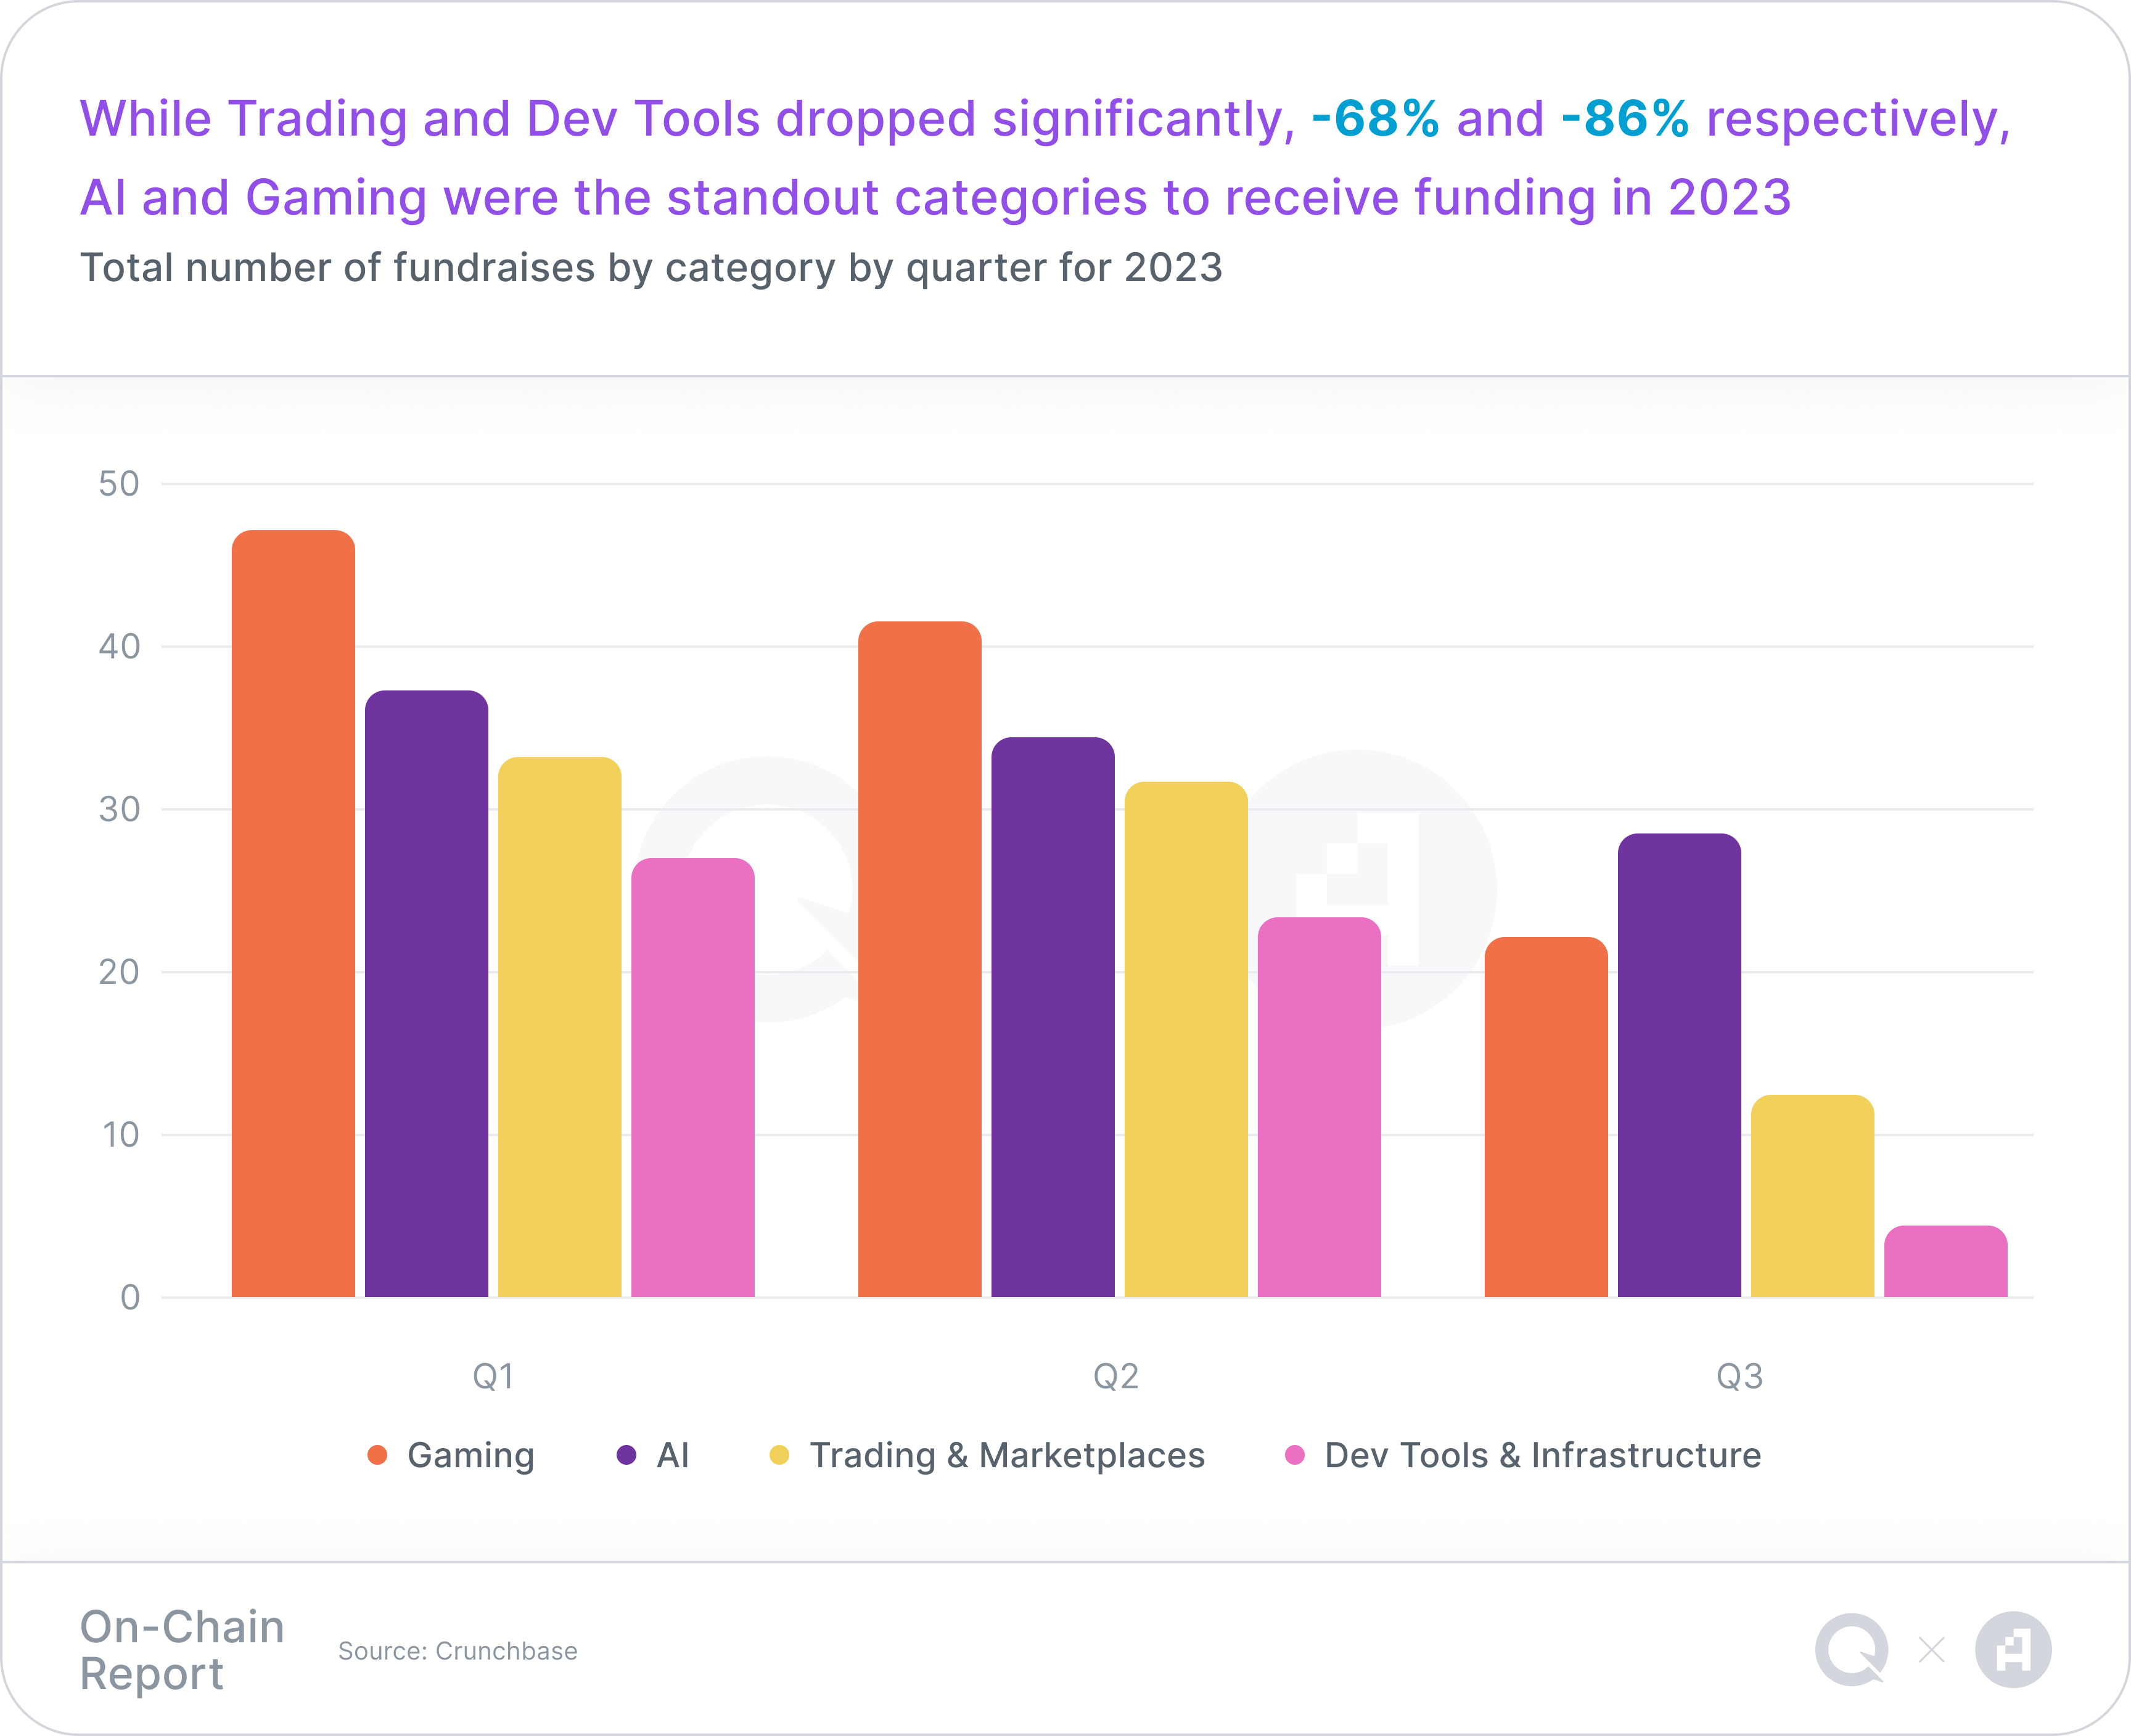 A chart representing Total number of fundraises by category by quarter for 2023, with a takeaway headline of "While Trading and Dev Tools dropped significantly, -68% and -86% respectively, AI and Gaming were the standout categories to receive funding in 2023"